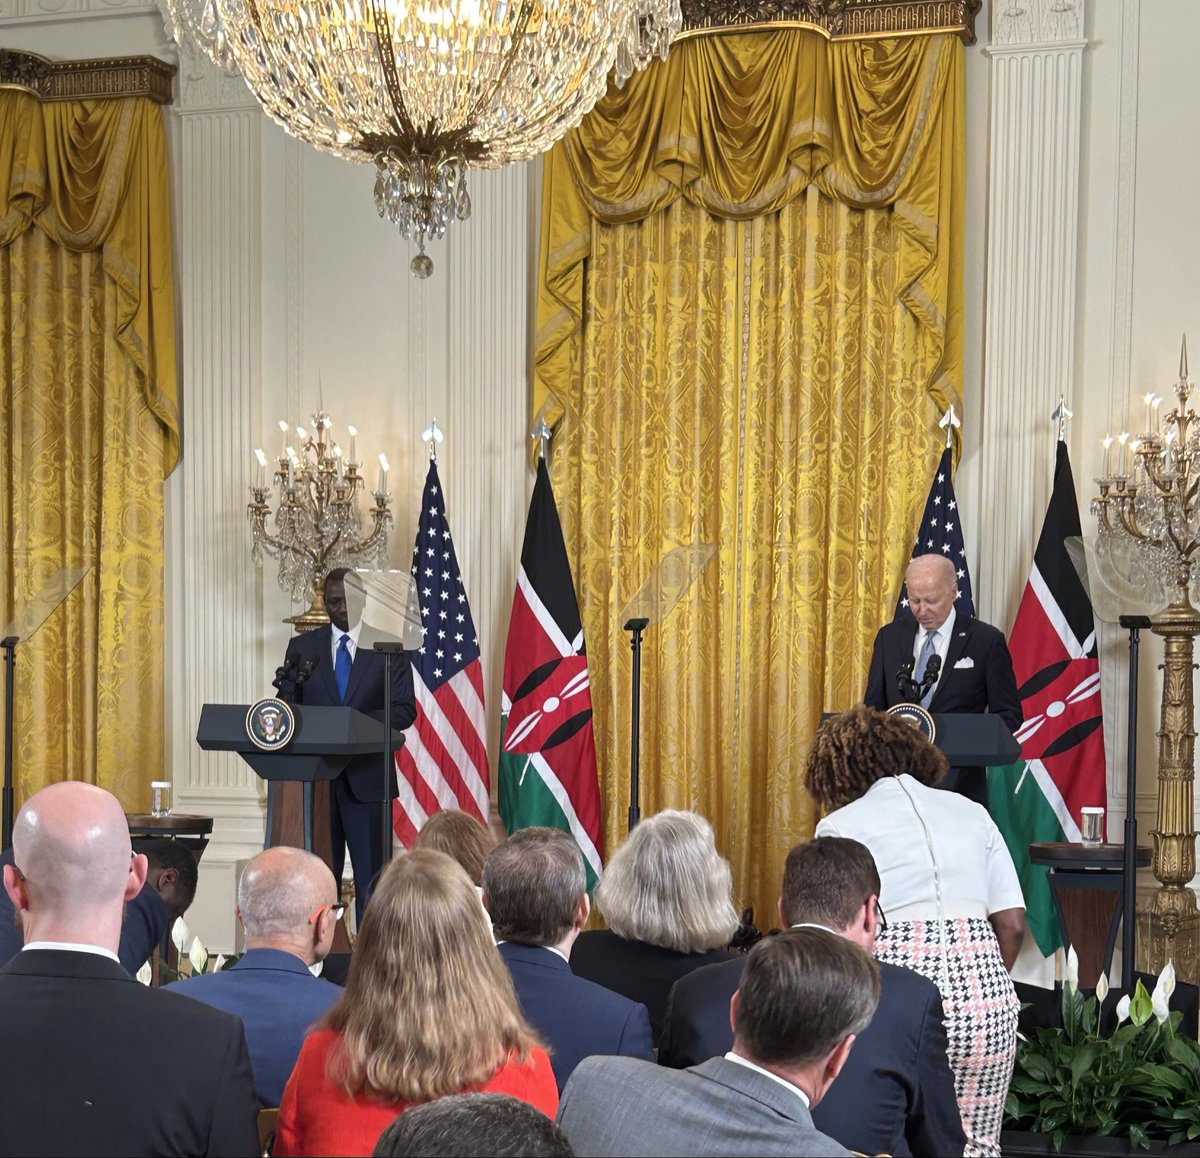 “I’m proud to announce we're working with Congress to designate Kenya, a major non-NATO ally.” — President Biden